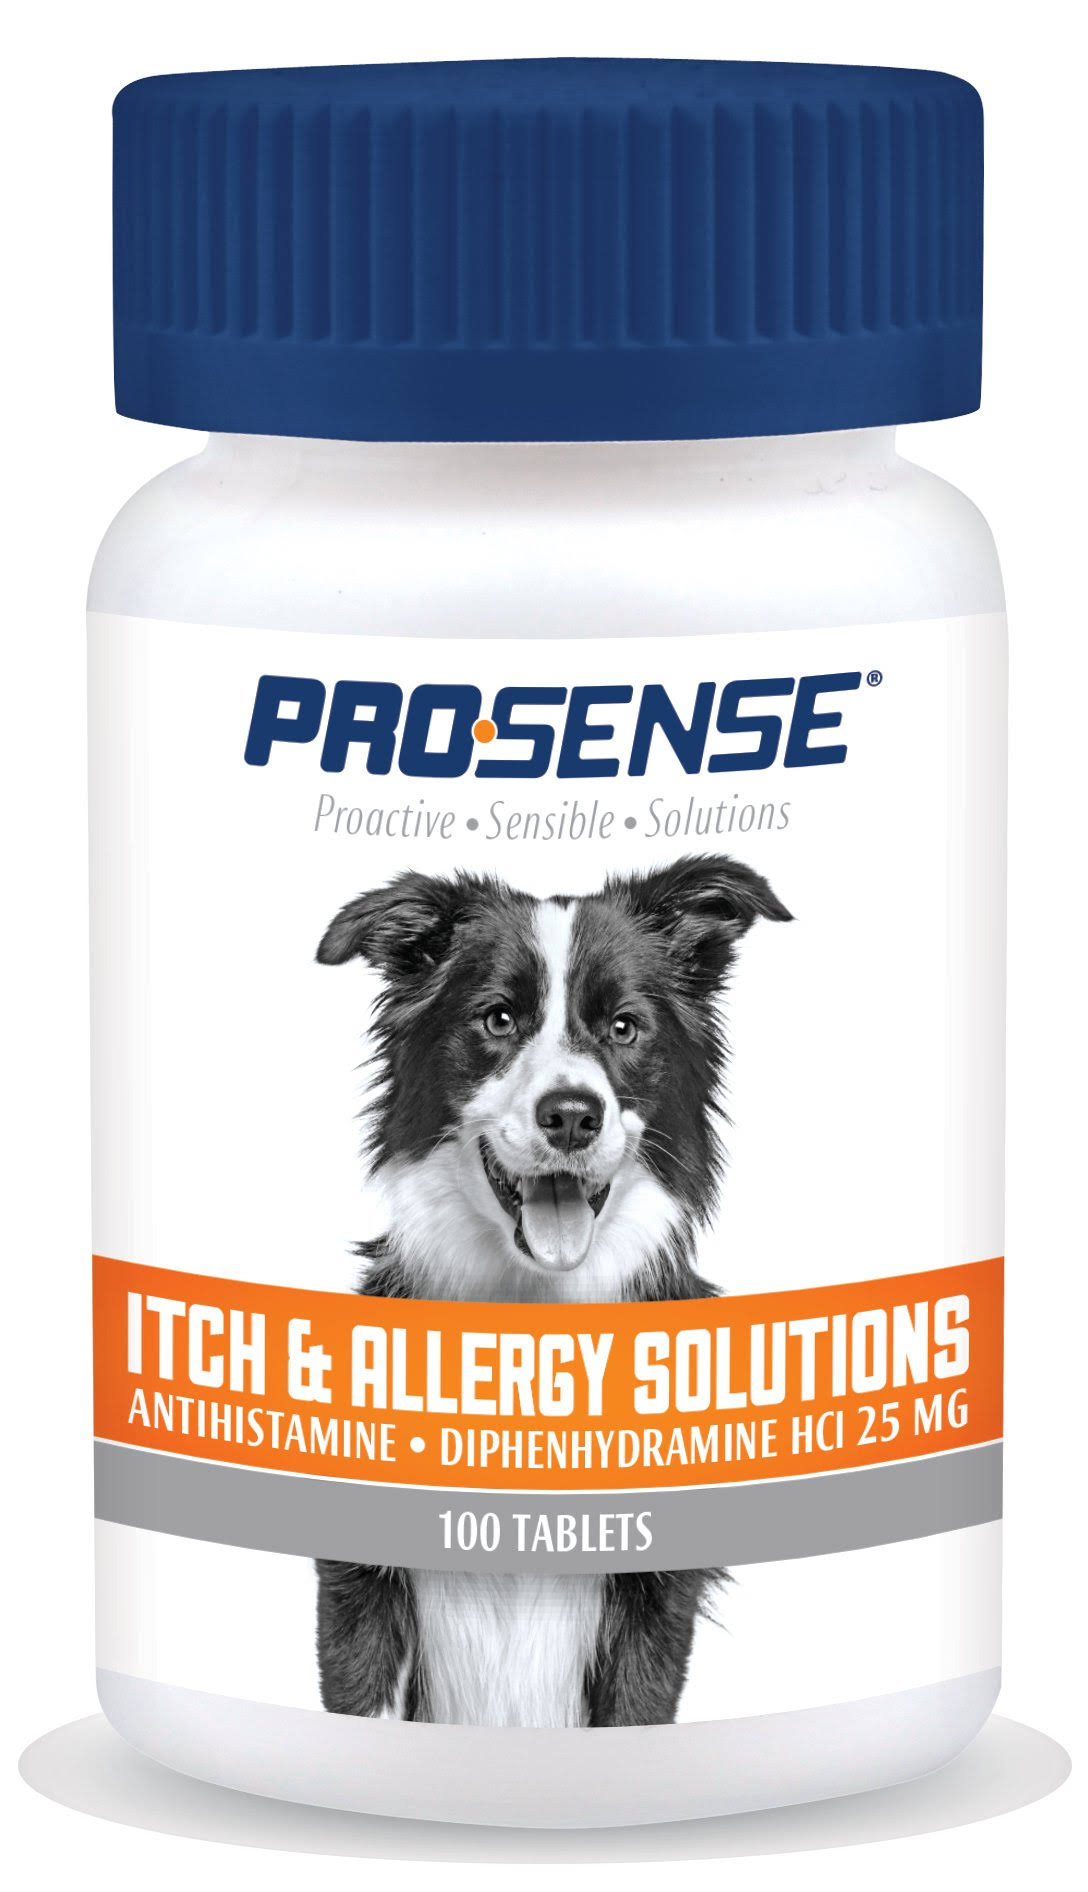 Pro Sense Allergy Relief Tablets for Dogs - 100 Tablets